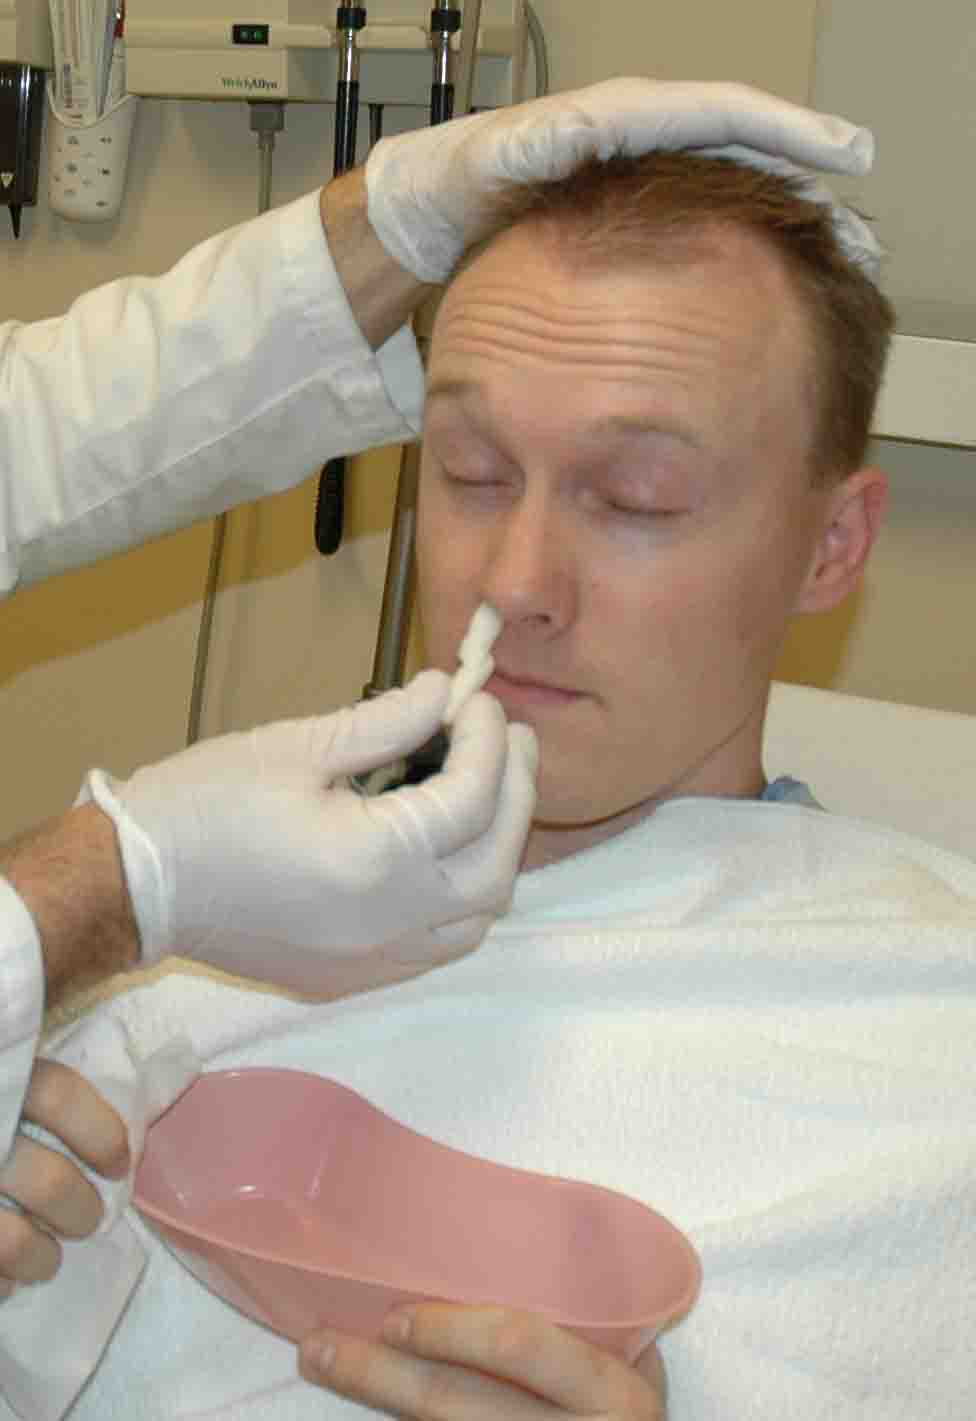 Inserting an oxymetzoline soaked cotton ball into the bleeding nostril